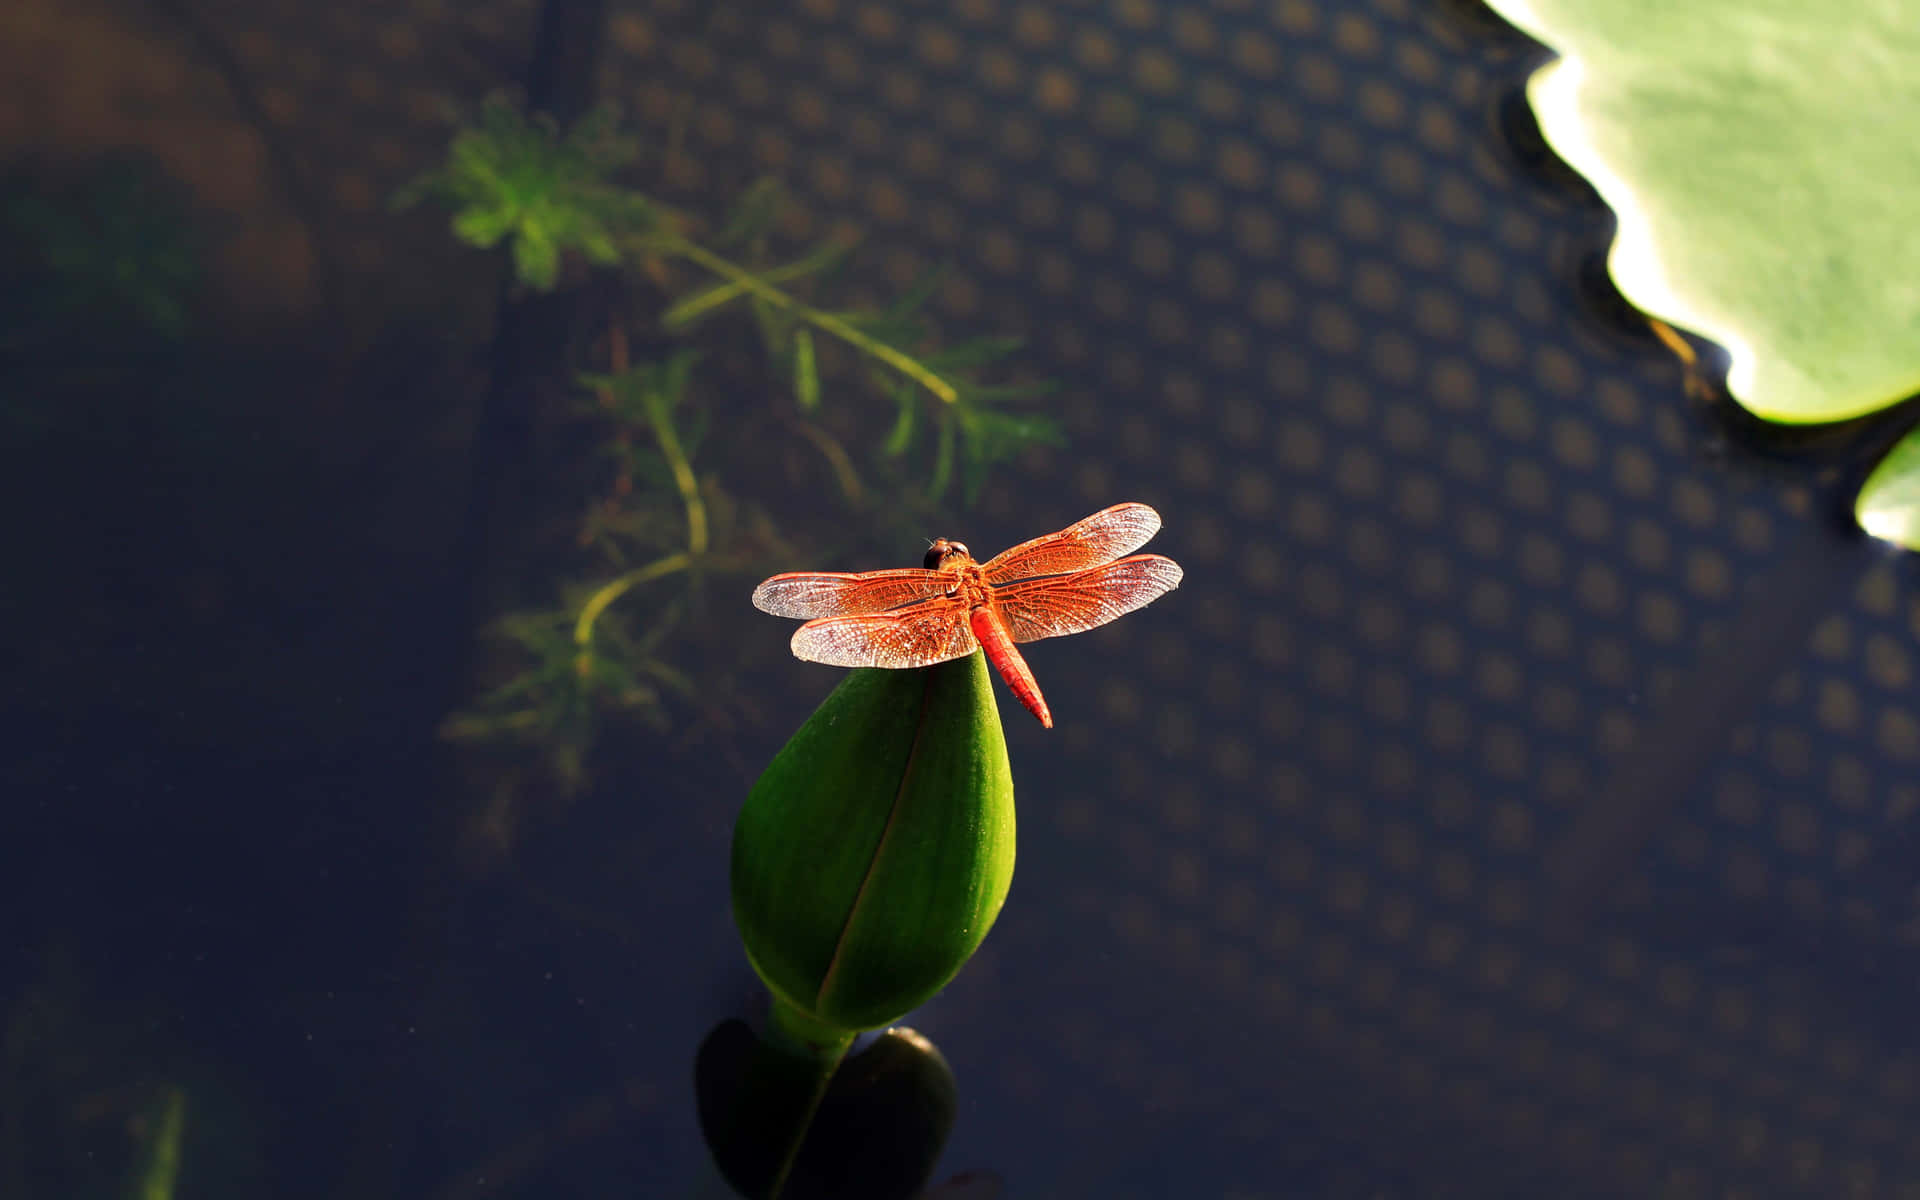 A colorful dragonfly soaking up the summer sun